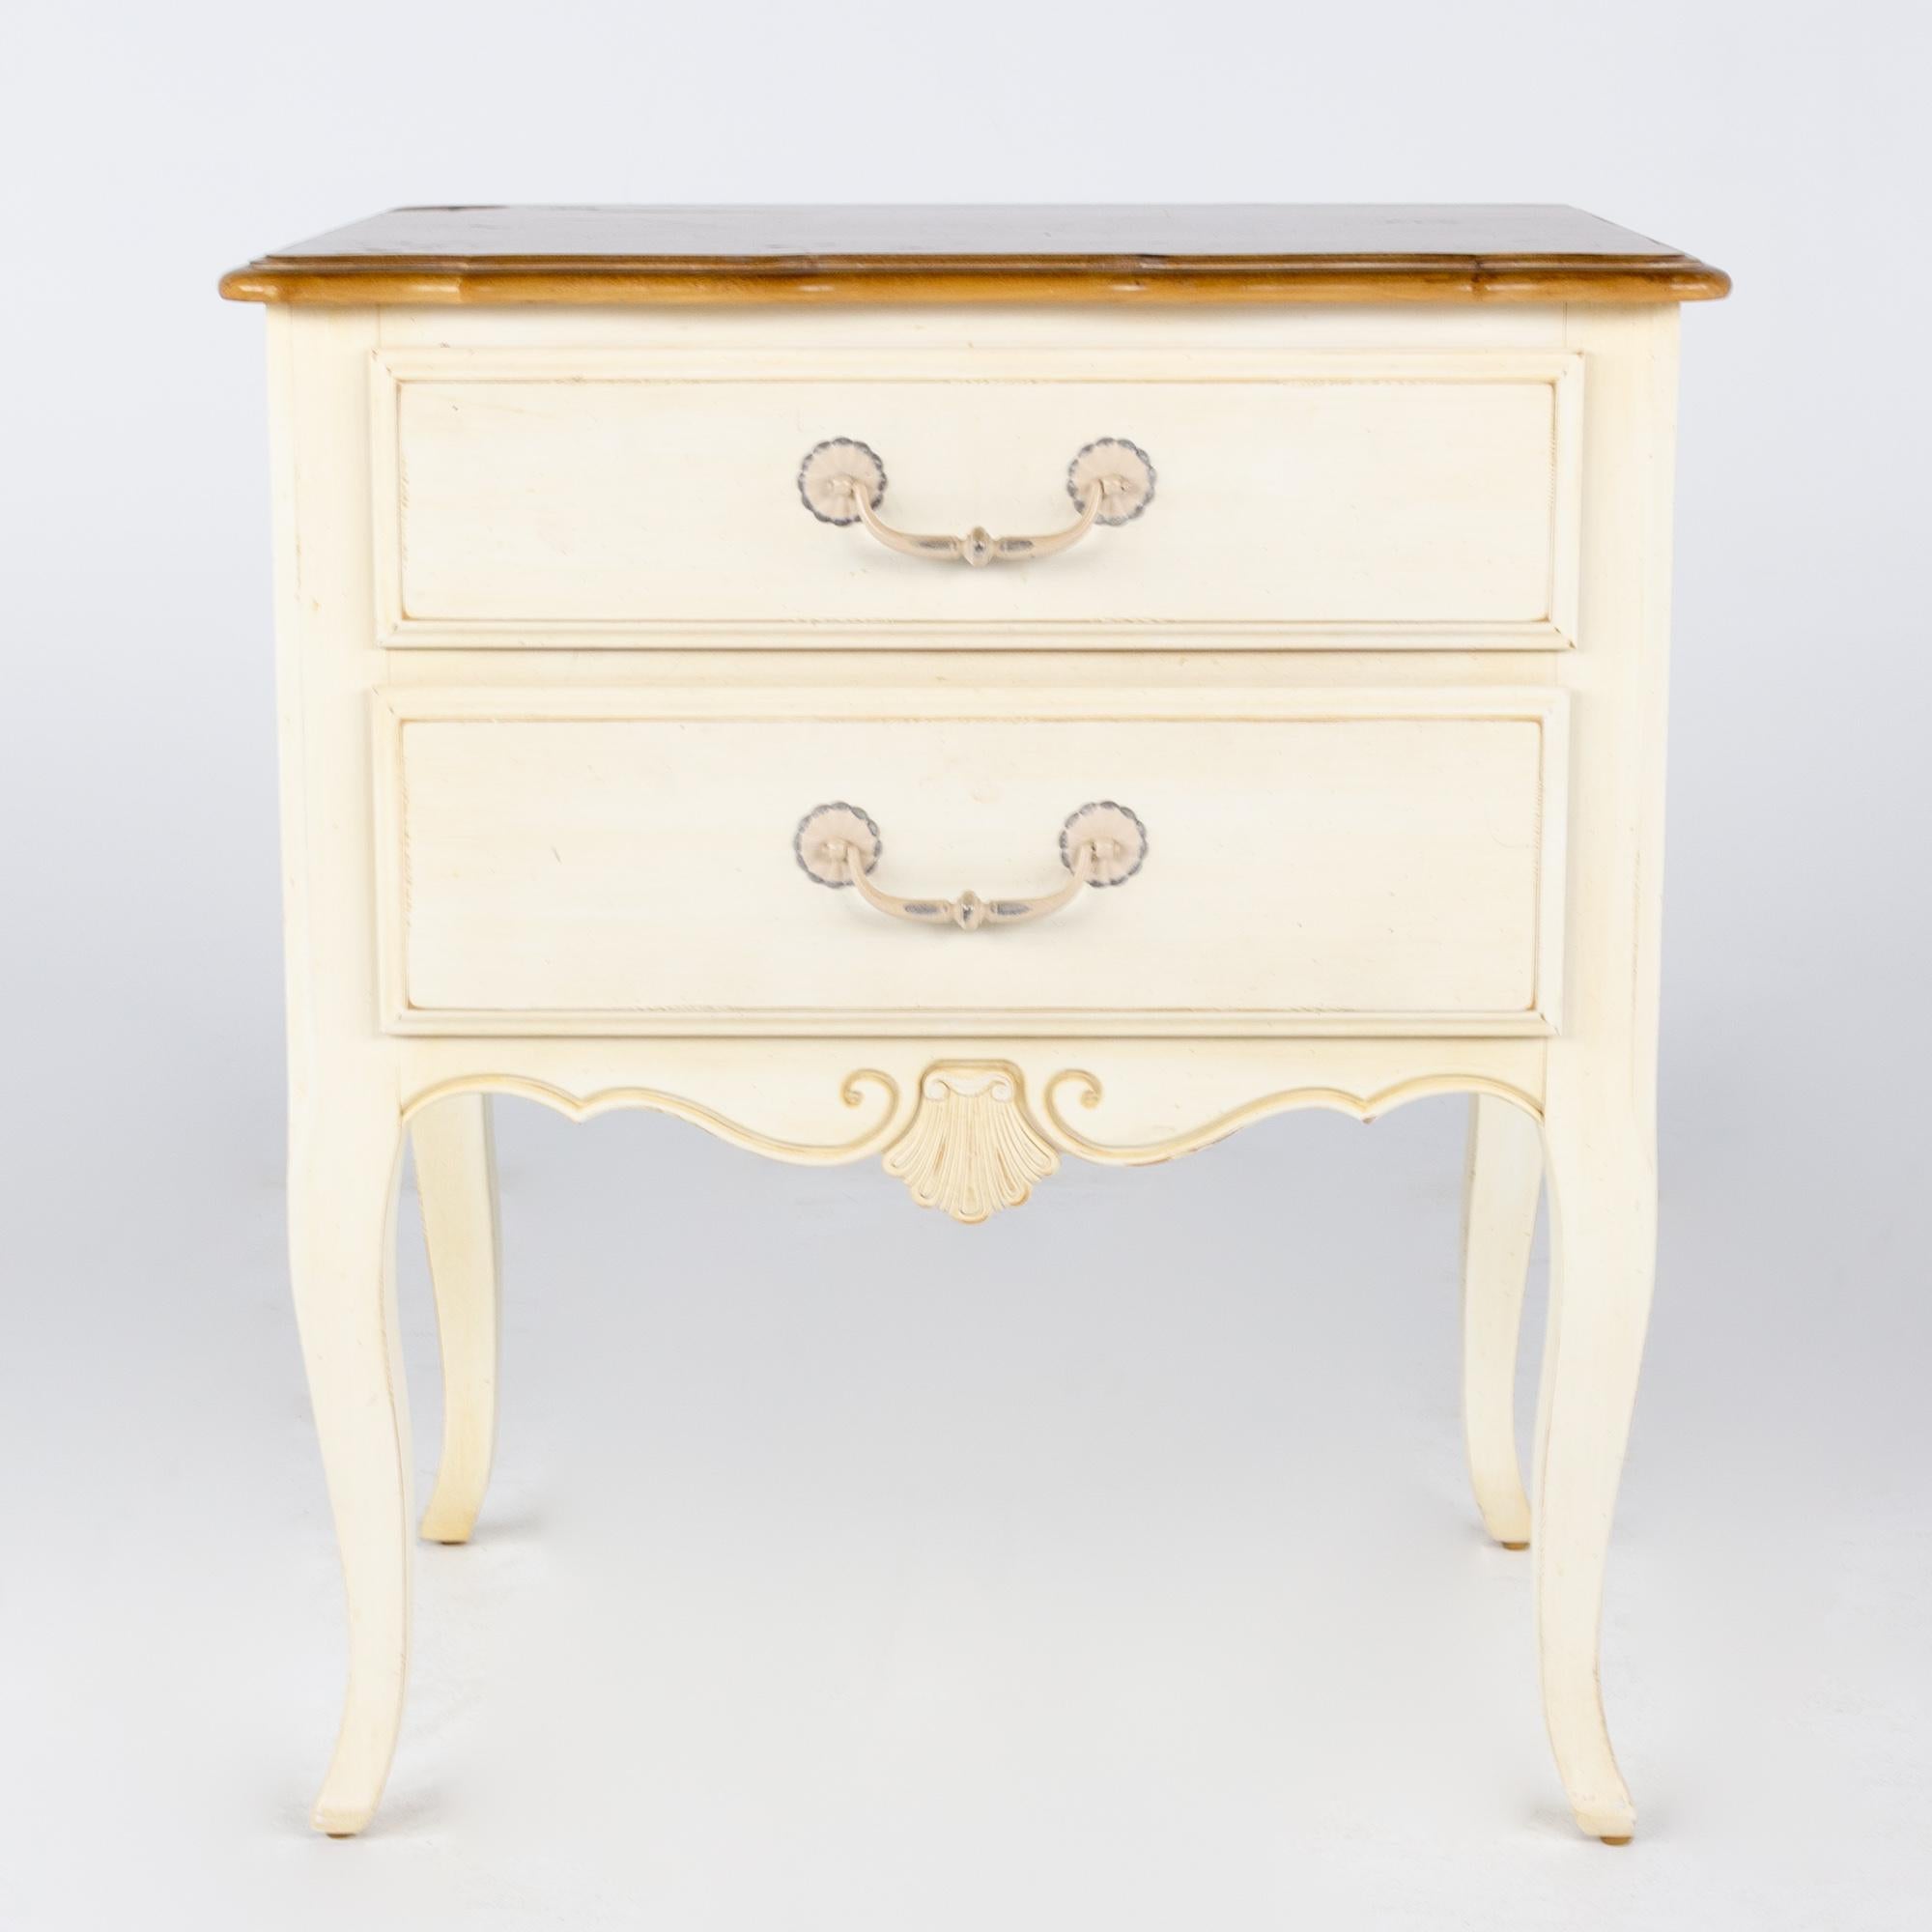 Ethan Allen French Country 2 drawer side table nightstand

This nightstand measures: 25.5 wide x 18 deep x 28.5 inches high

About Photos: We take our photos in a controlled lighting studio to show as much detail as possible. We do not photoshop out